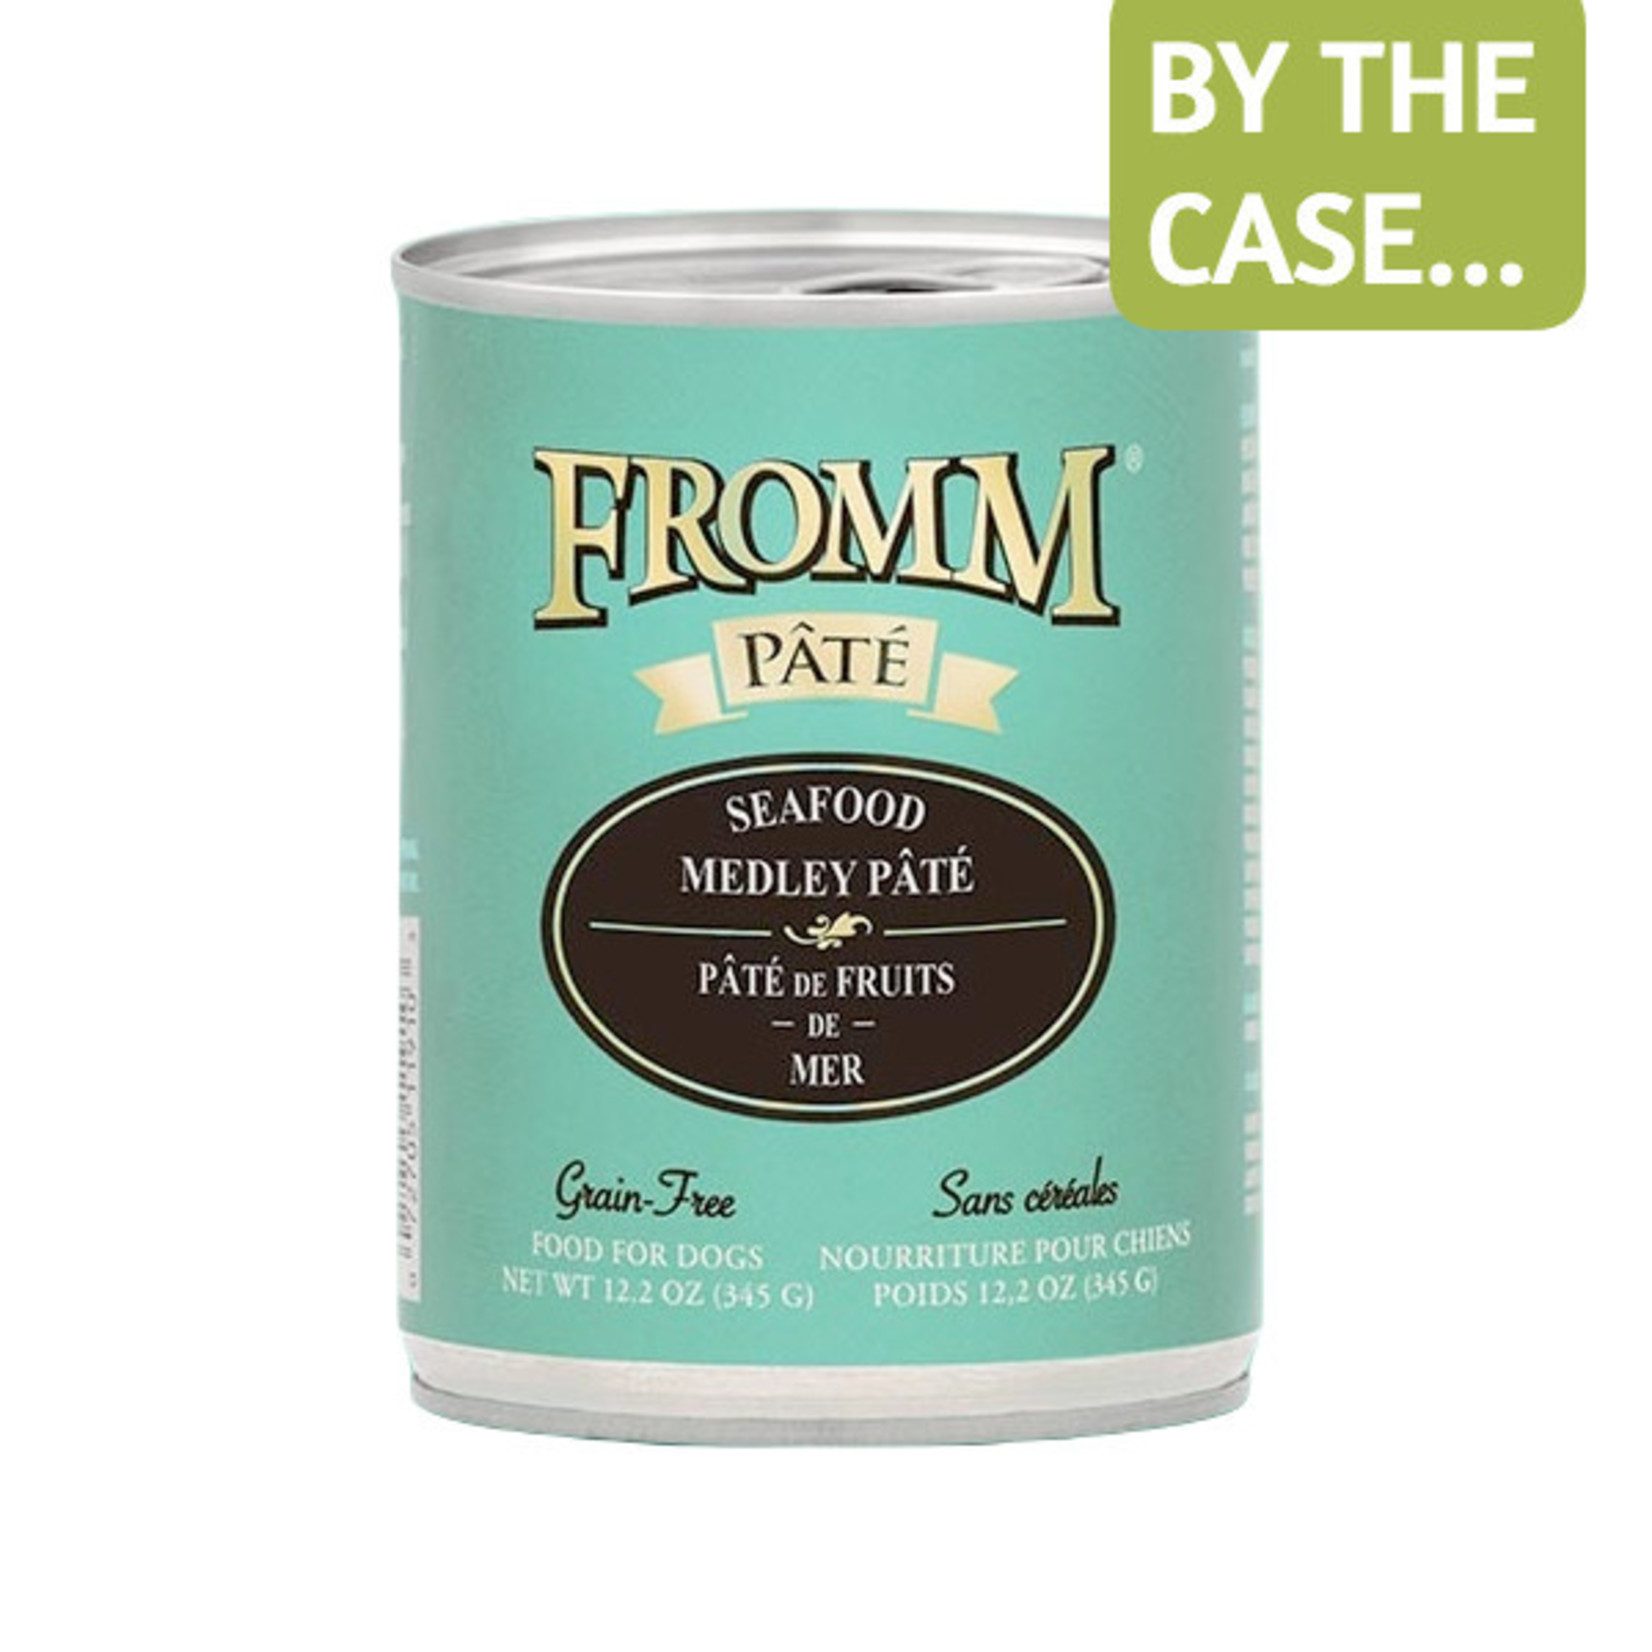 Fromm Fromm Wet Dog Food Seafood Medley Pate 12.2oz Can Grain Free